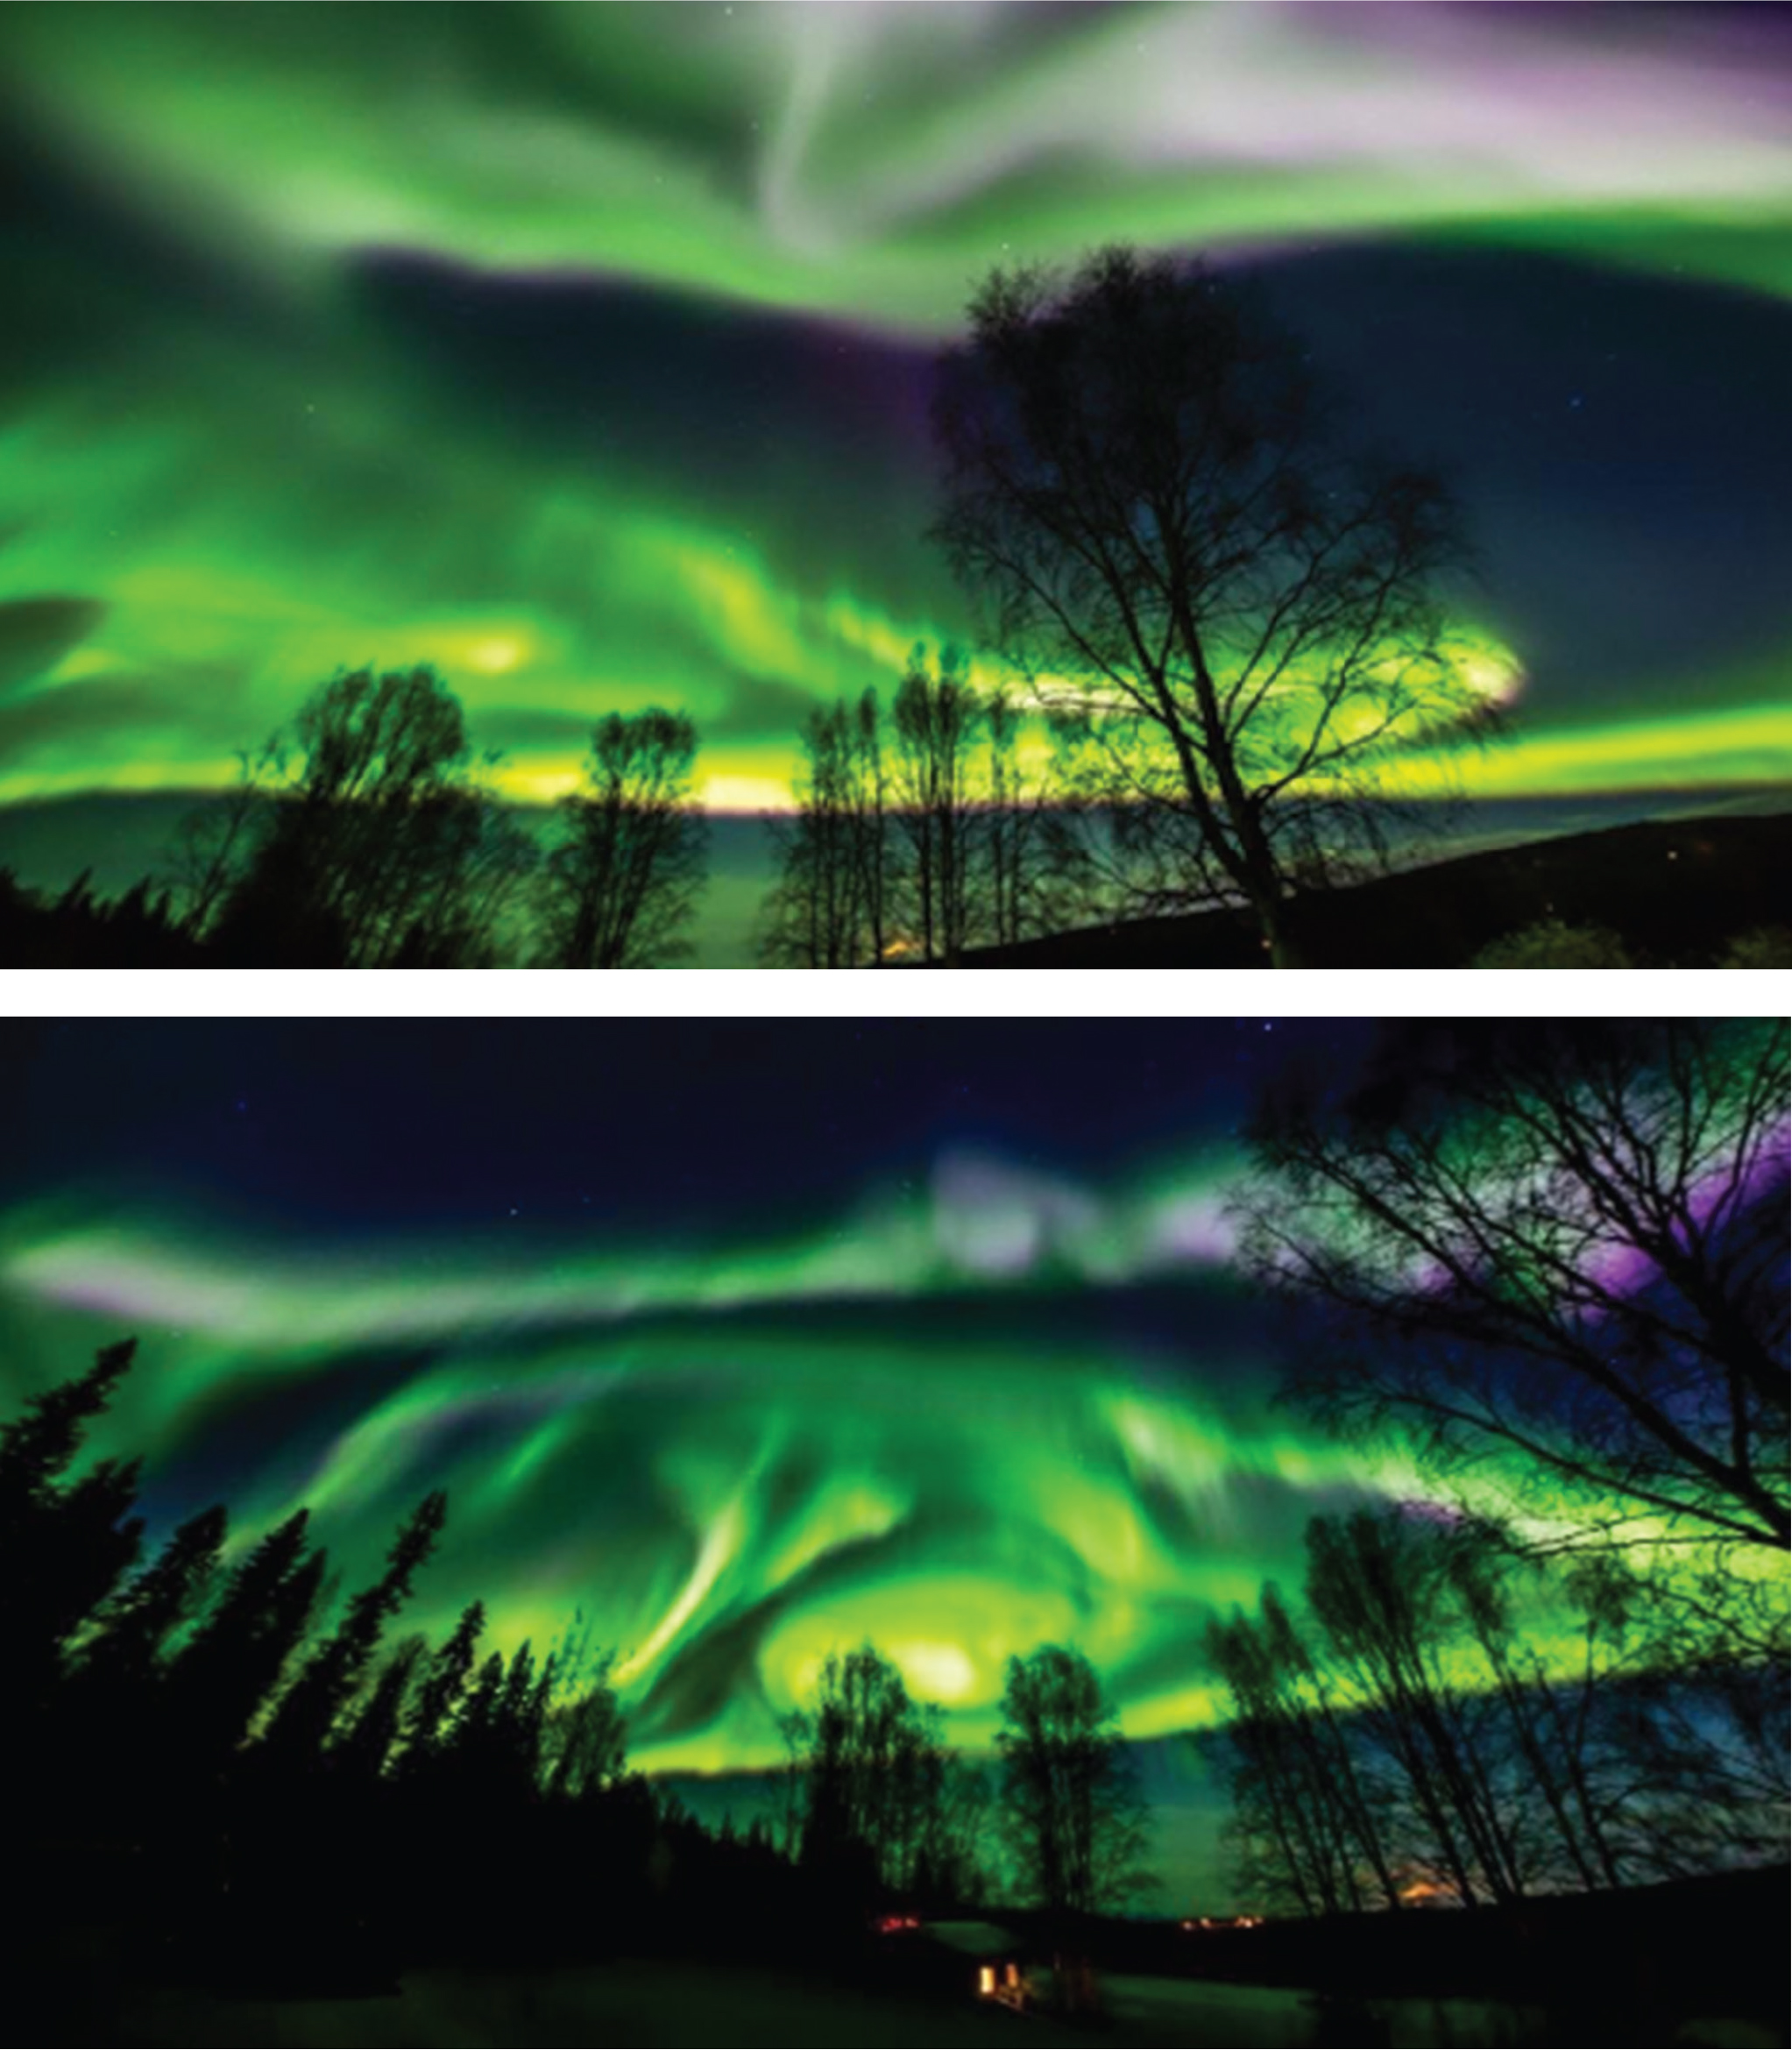 Images of the Aurora Borealis taken September 27, 2017 by Todd Paris. The two images (from the same night) show the variations of shapes and colors of the Aurora displays.